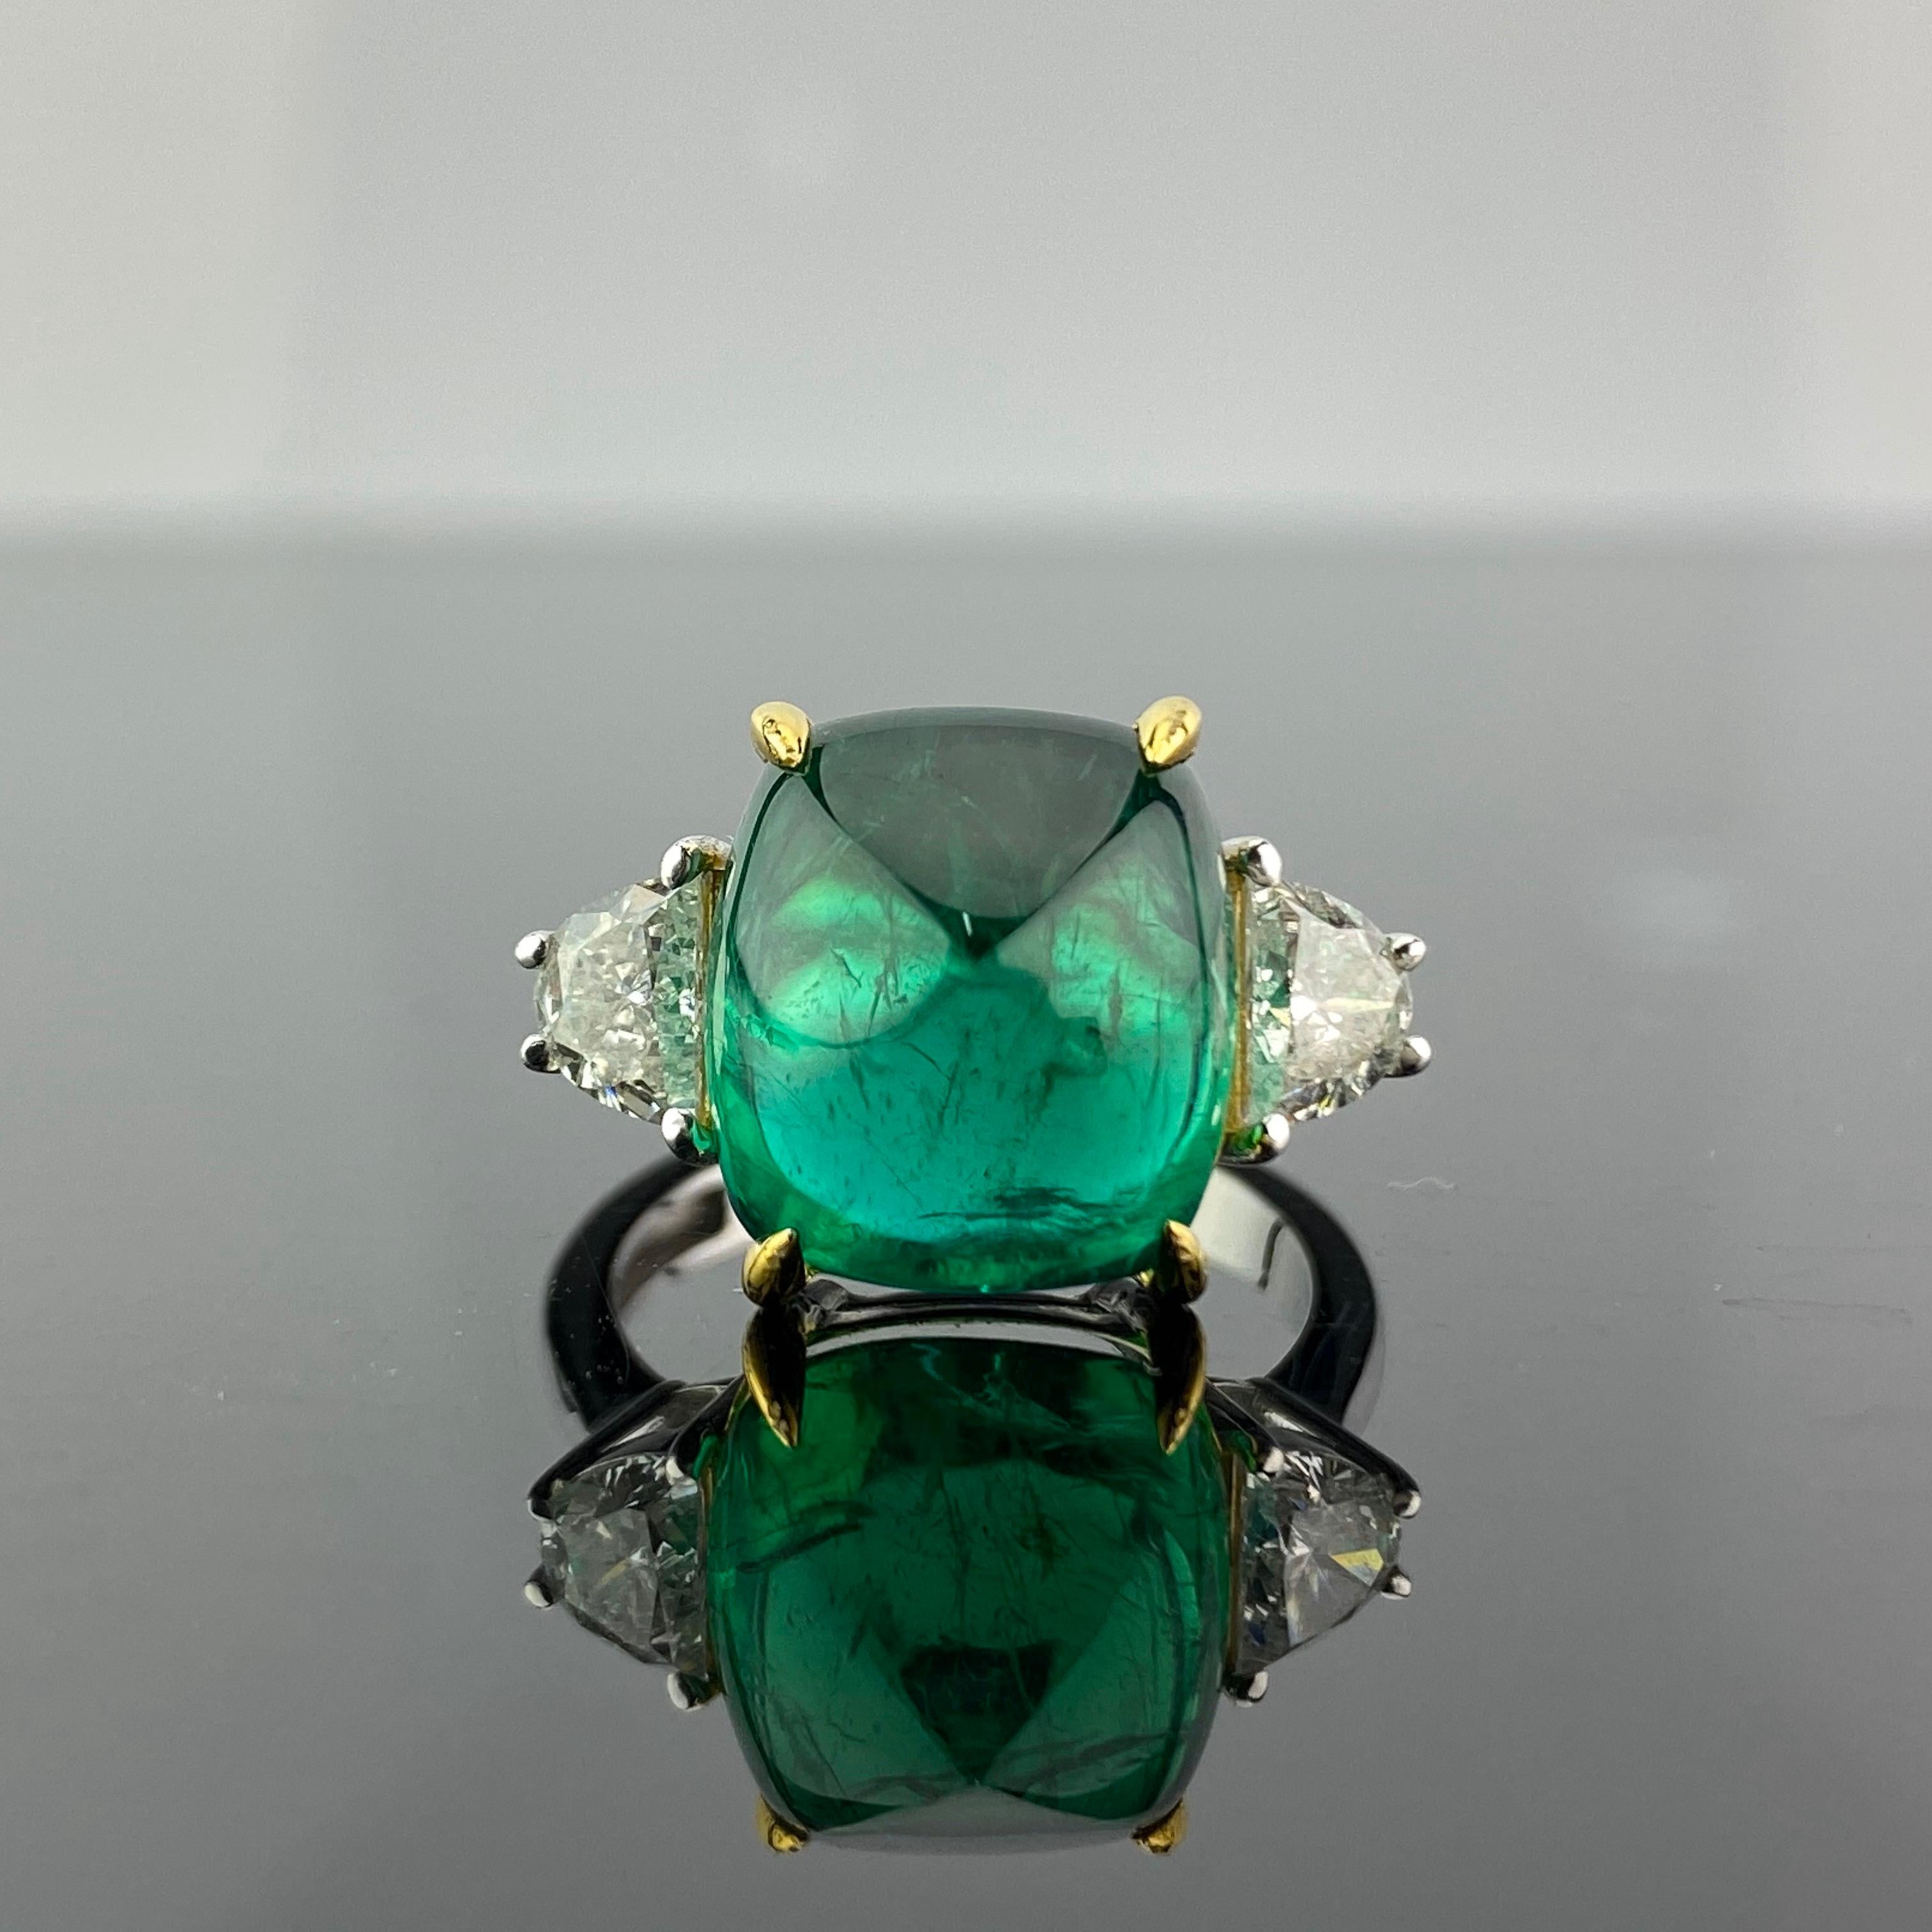 A one-of-a-kind three stone engagement ring, with a 9.15 carat transparent natural Zambian Emerald centre stone and 2 half-moon side stone diamonds. The emerald is of great lustre and has an ideal colour. All set in 18K white gold. Currently a ring